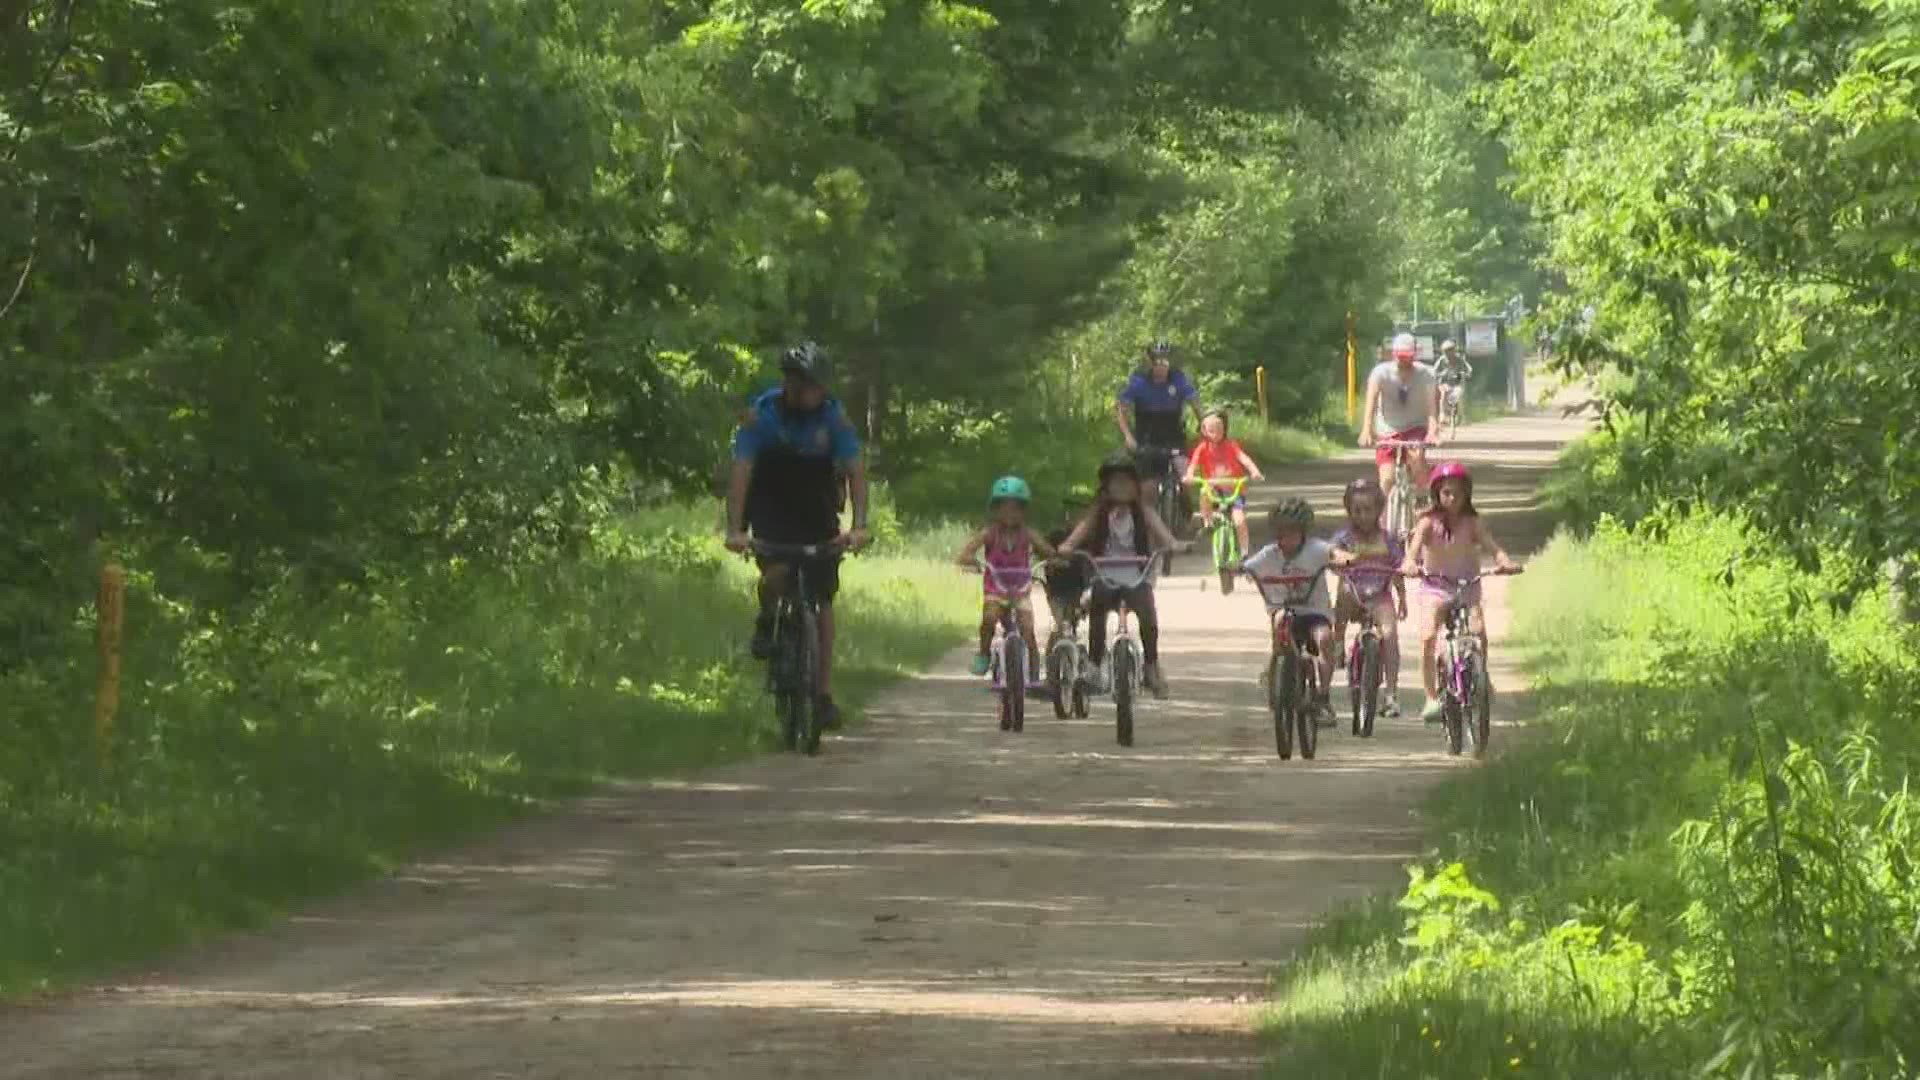 The Biddeford Police Department and Apex Youth Connection teamed up to host a "Bike with a Cop" event to make positive connections within the community.